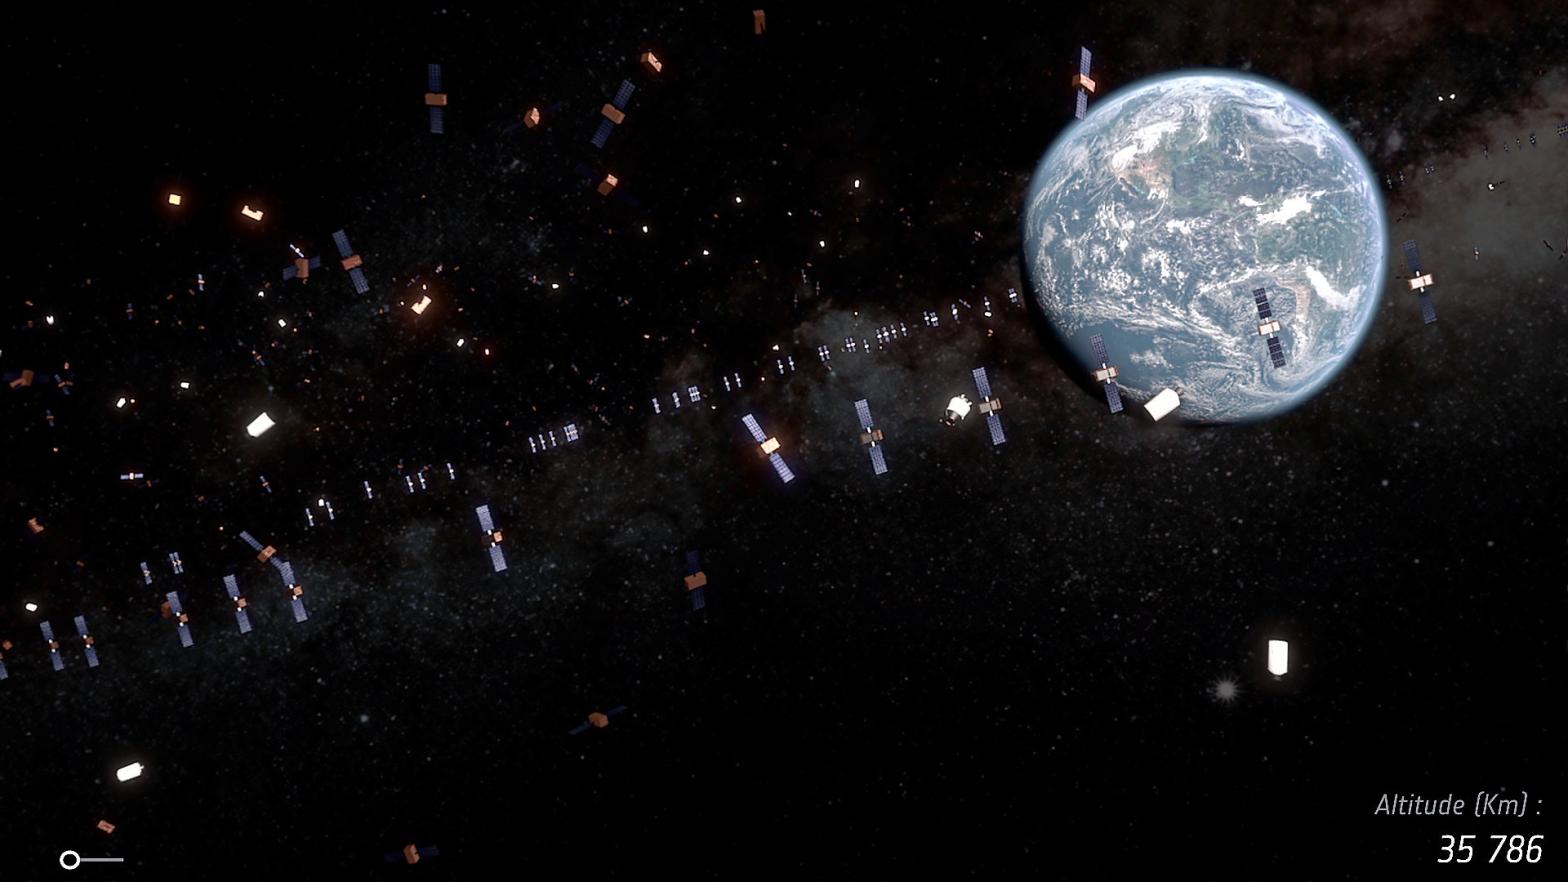 A growing number of satellites in low Earth orbit is increasing the chances of collisions in space. (Illustration: ESA)